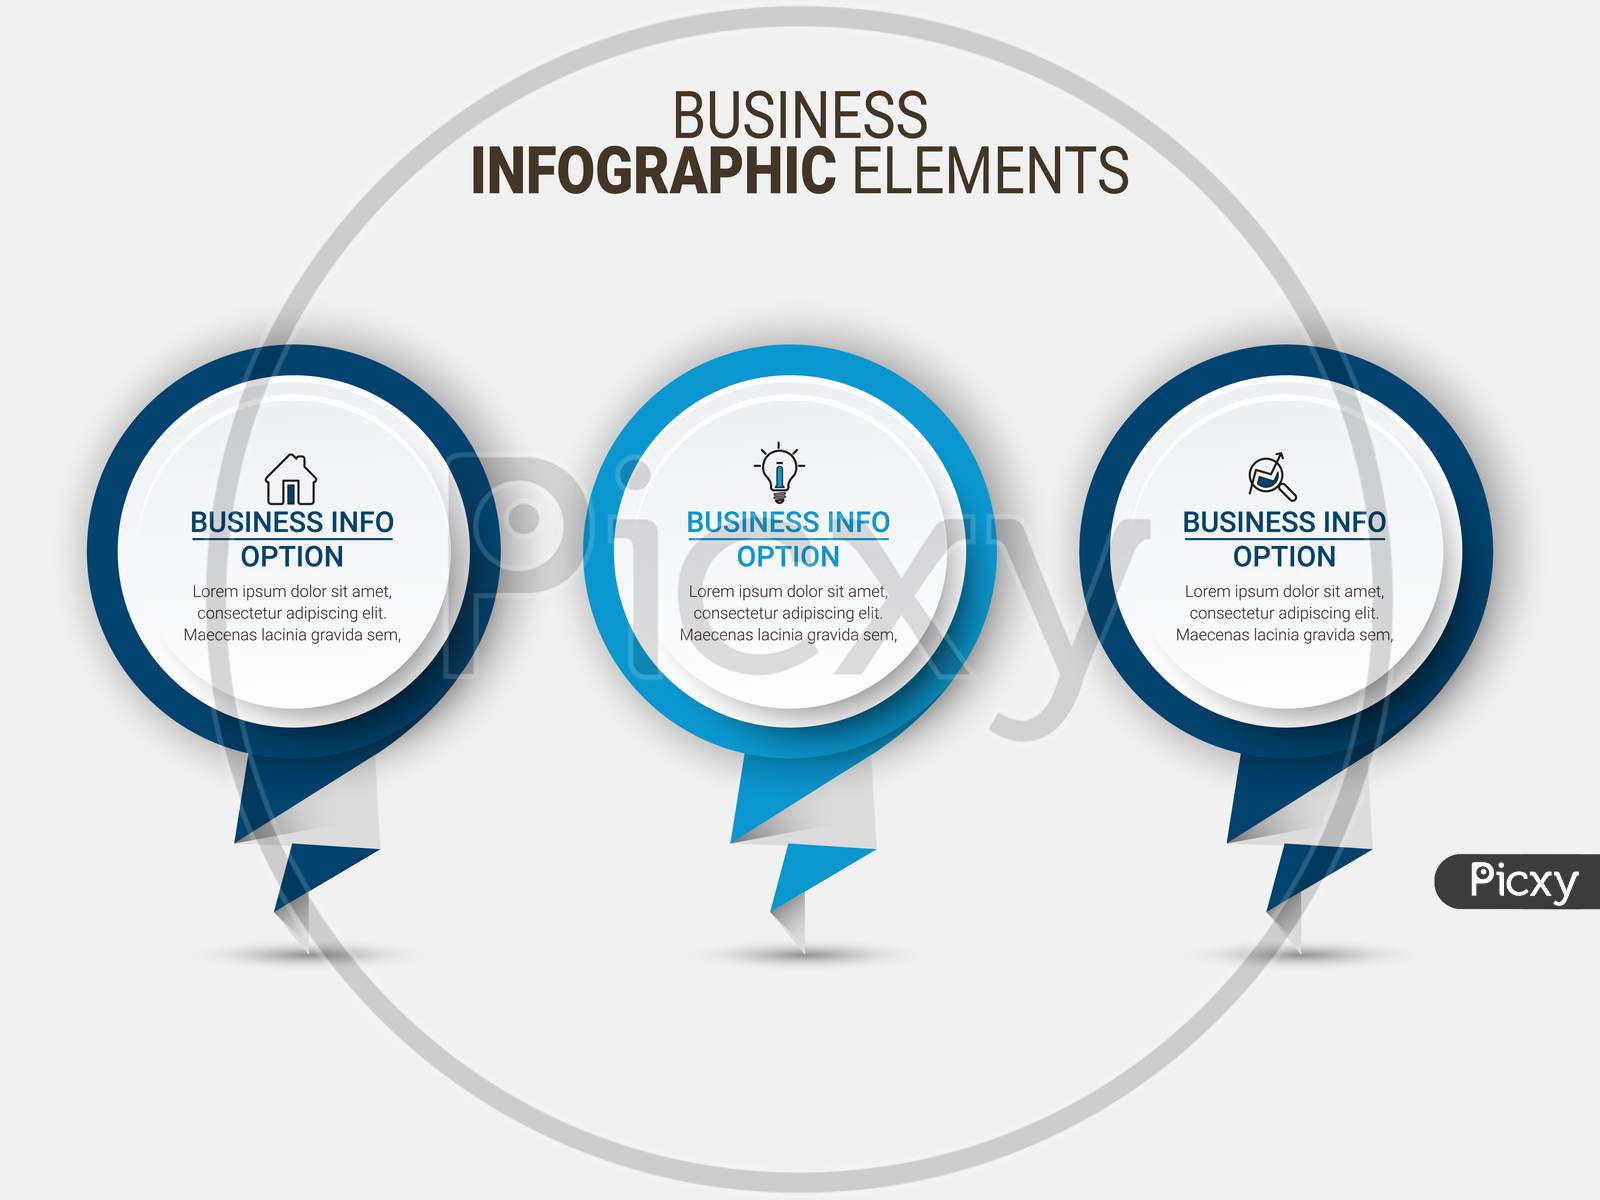 Business data visualization. Simple infographic design template. Abstract vector illustration.